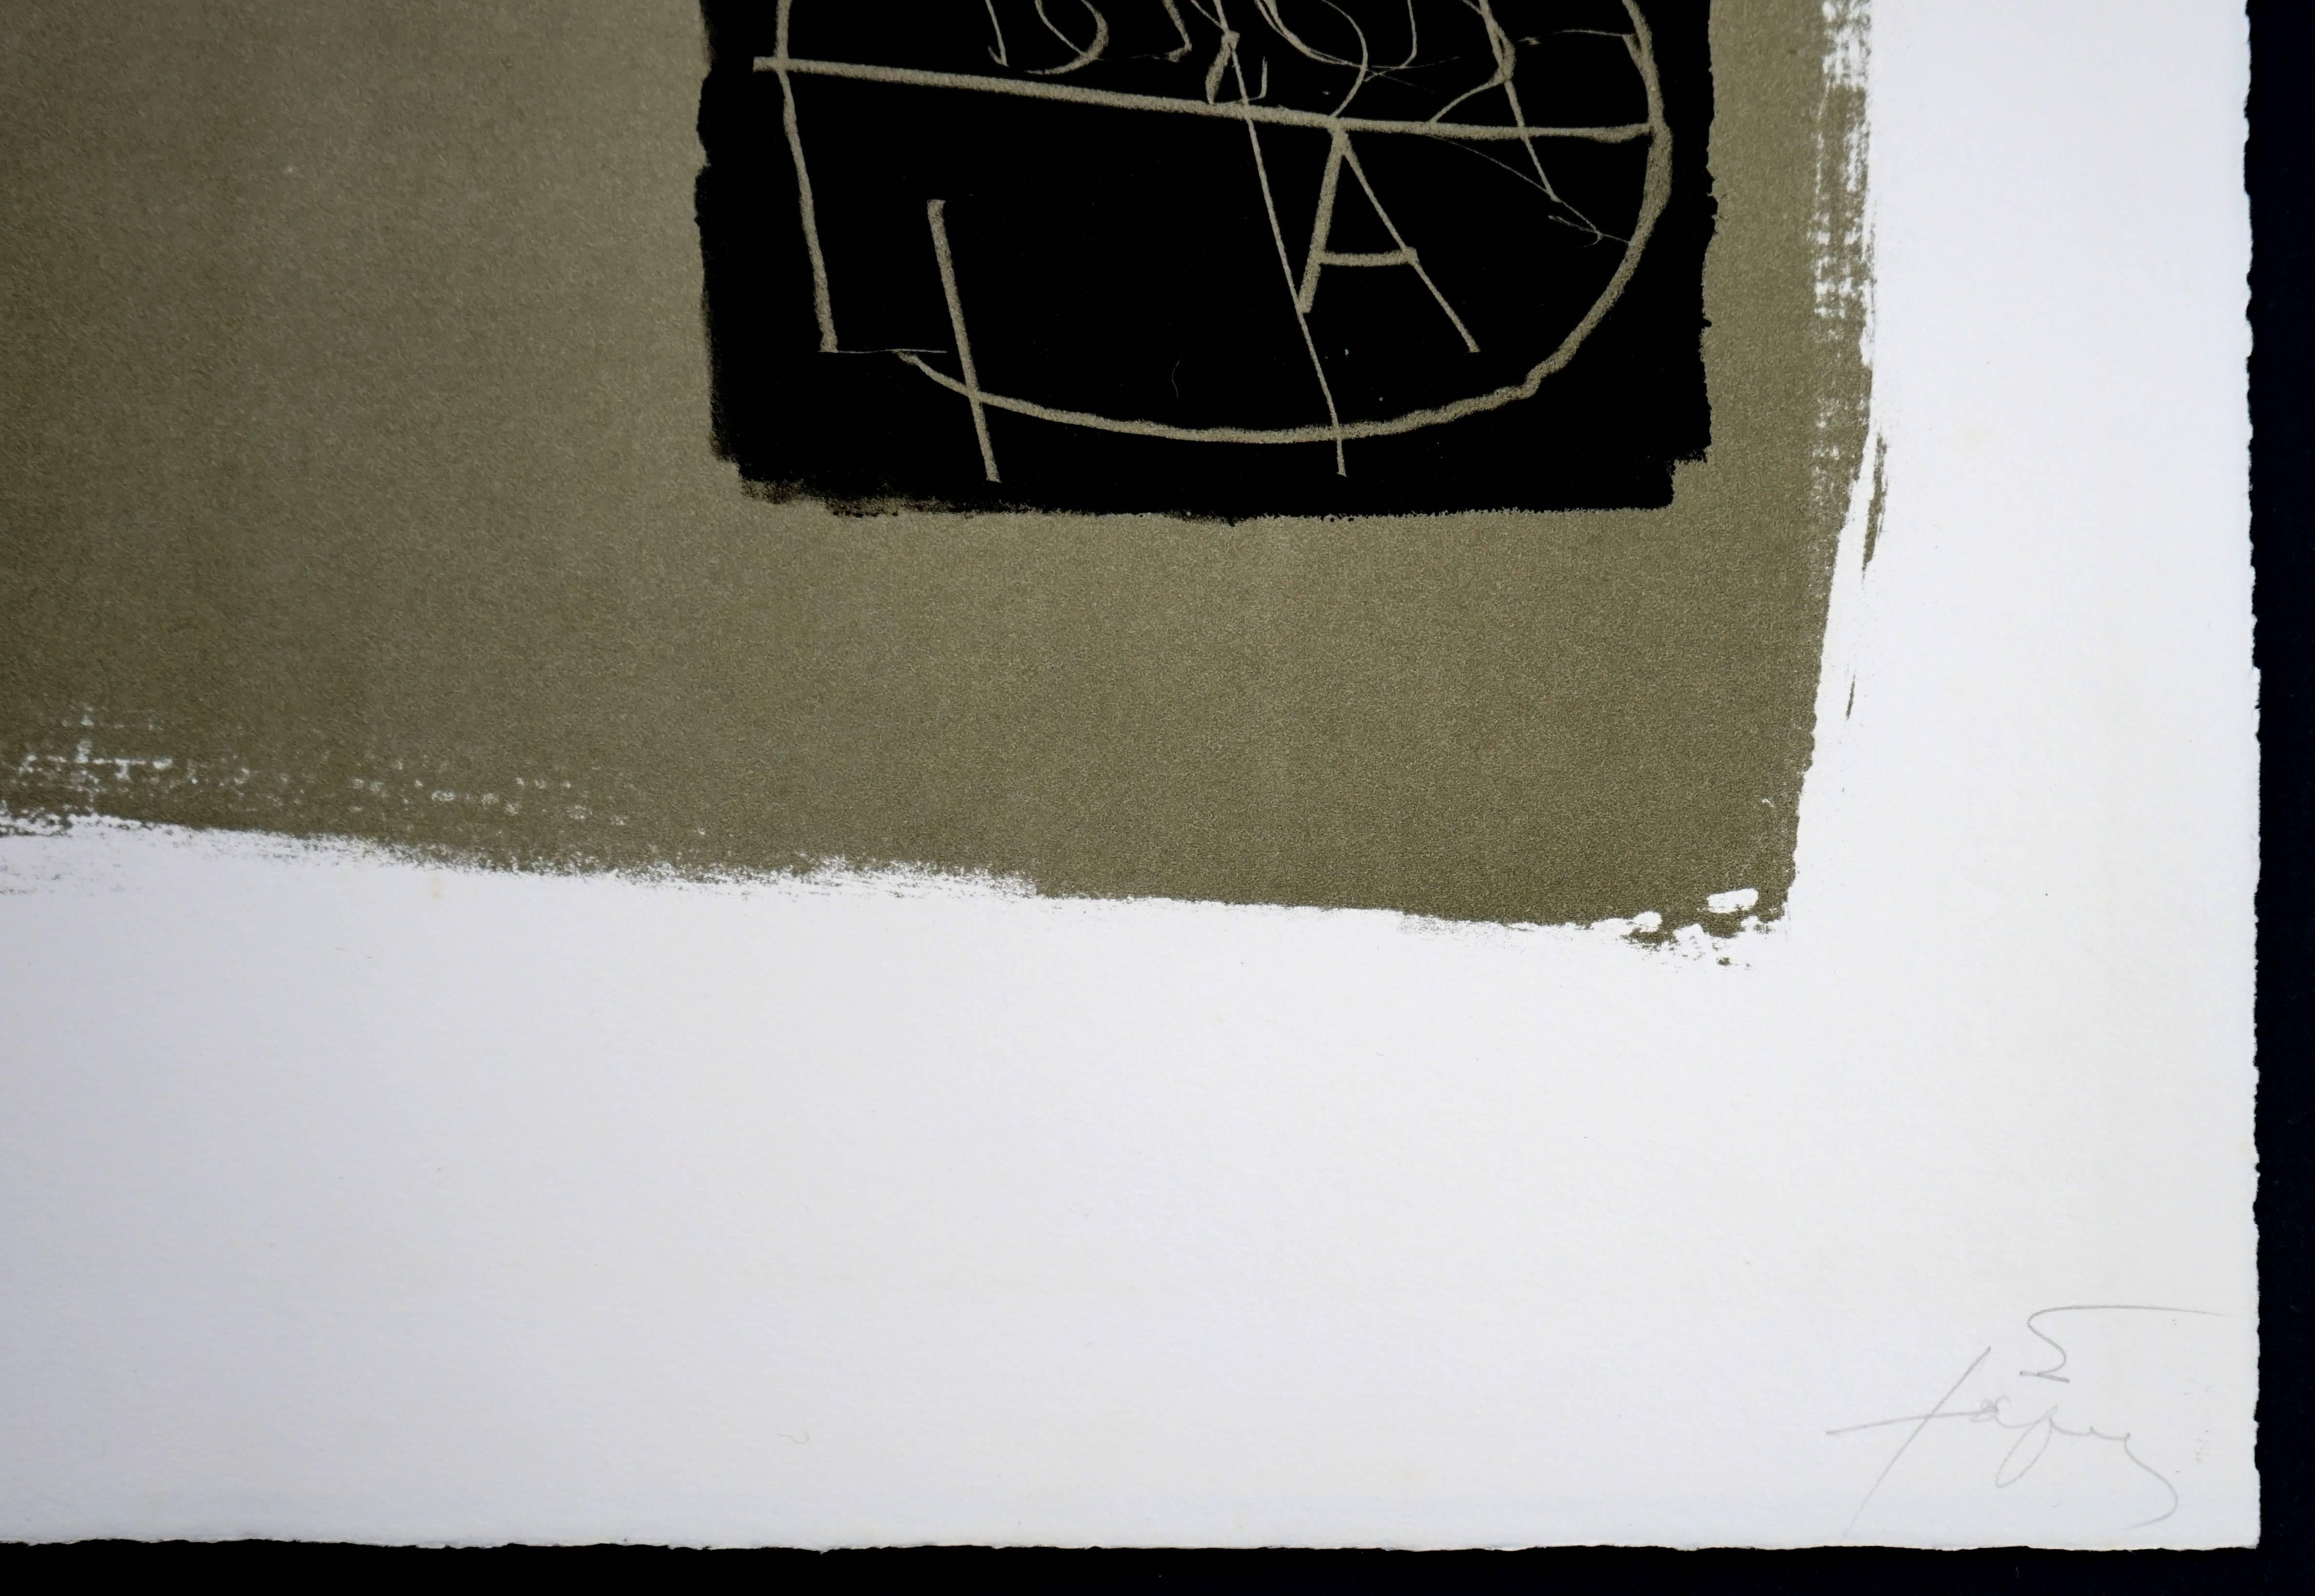 Artist: Antoni Tapies
Title: Art 6 '75
Year: 1975
Medium: Lithograph
Signed and numbered 114/150 bottom left with publisher's blindstamp
In excellent condition. 
Dimensions: 35.25 x 25 in Framed Dimensions: 43.25 x 34 x 1 inches 
Beautifully framed